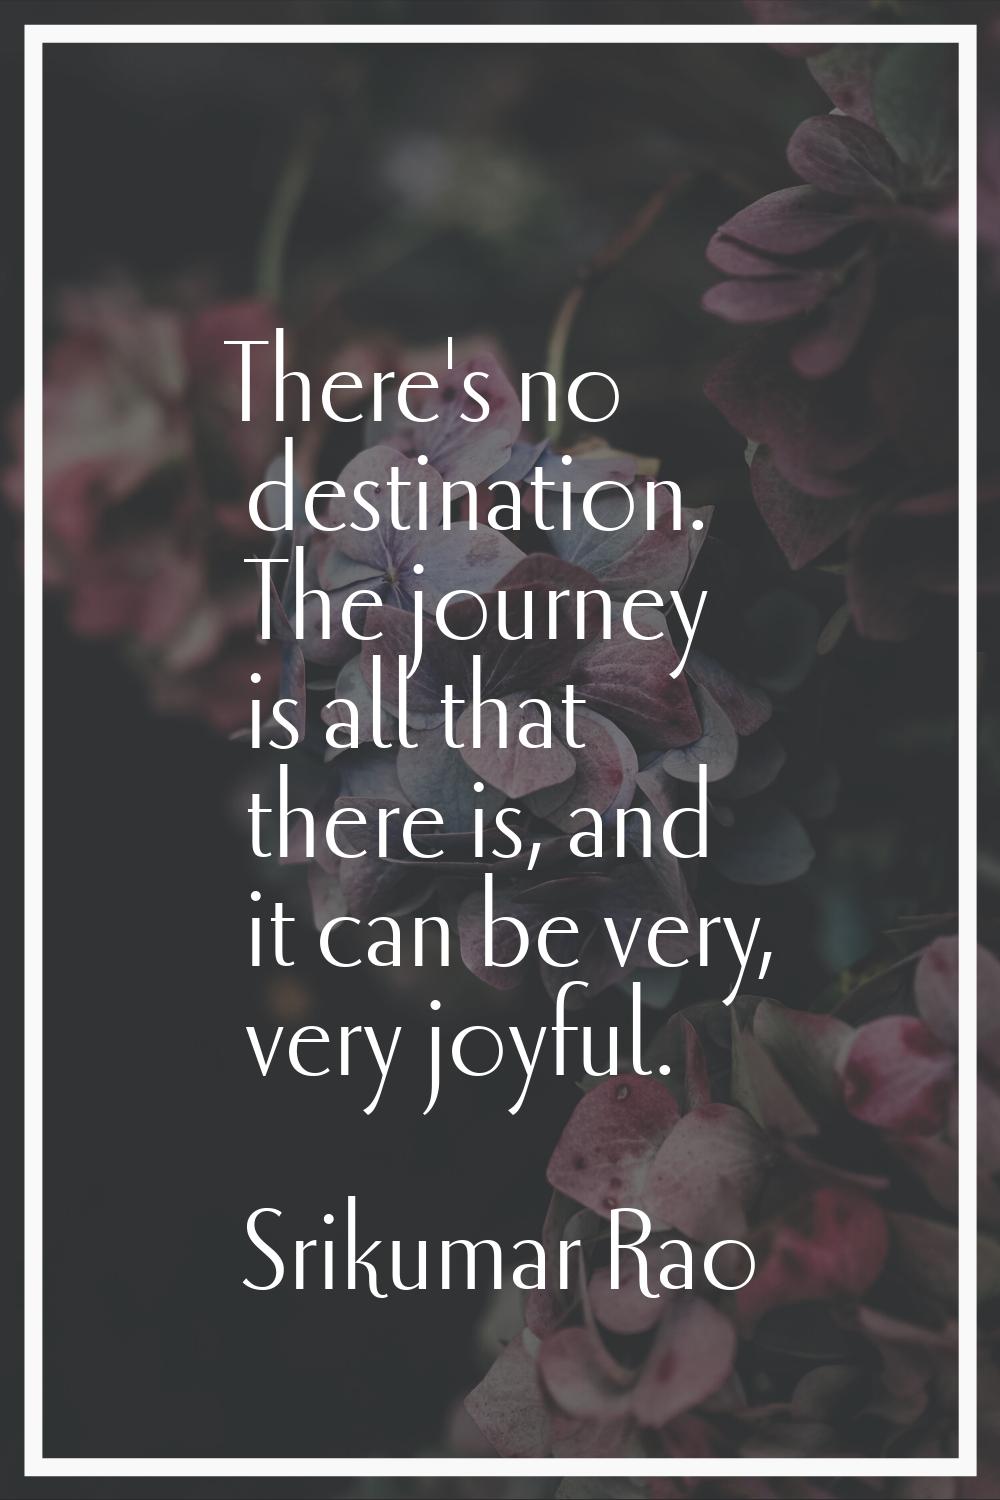 There's no destination. The journey is all that there is, and it can be very, very joyful.